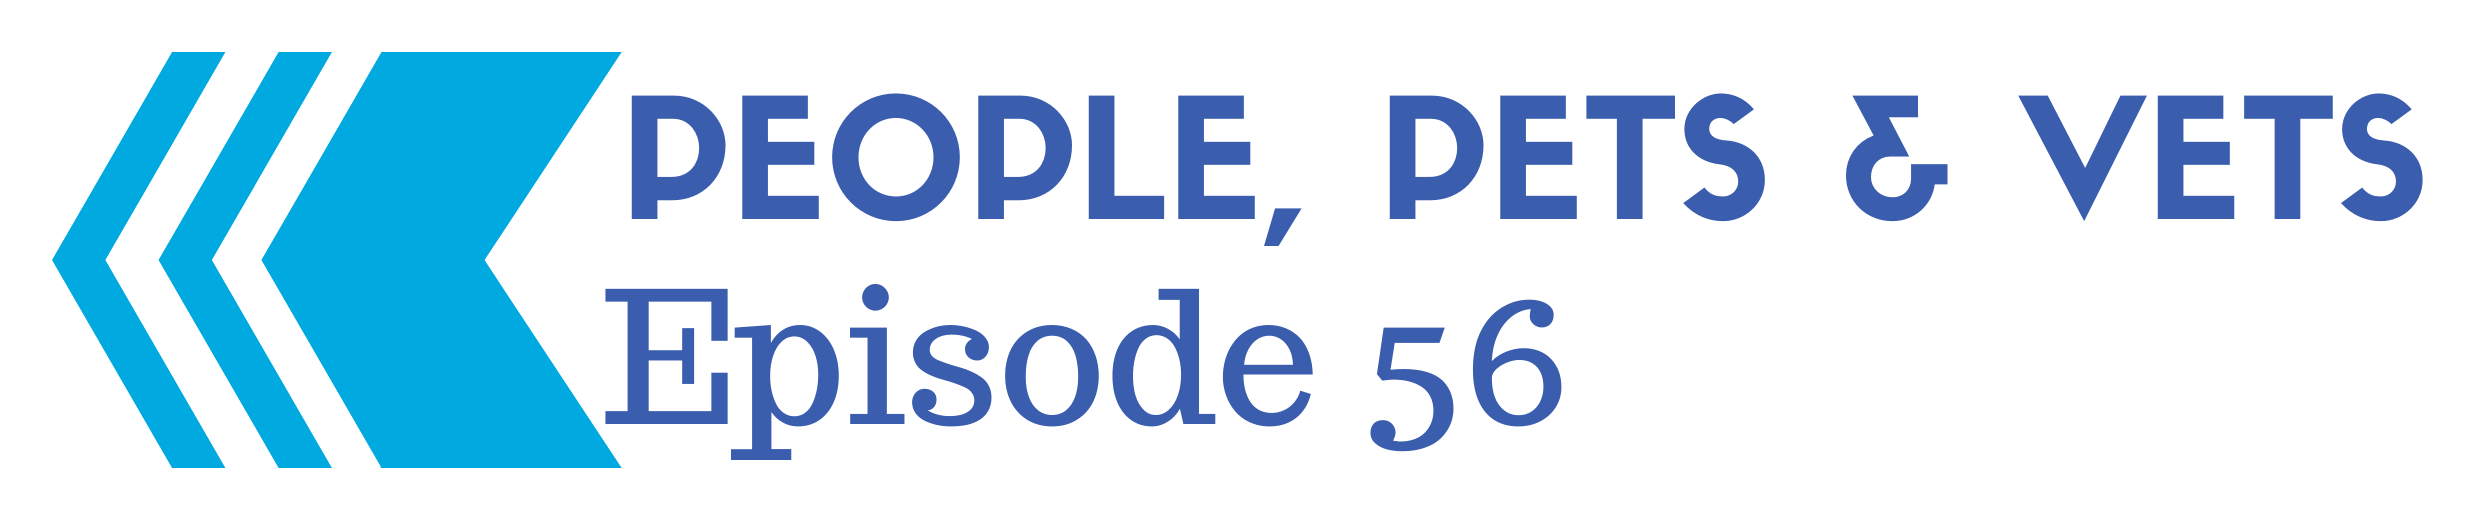 Back to Episode 56